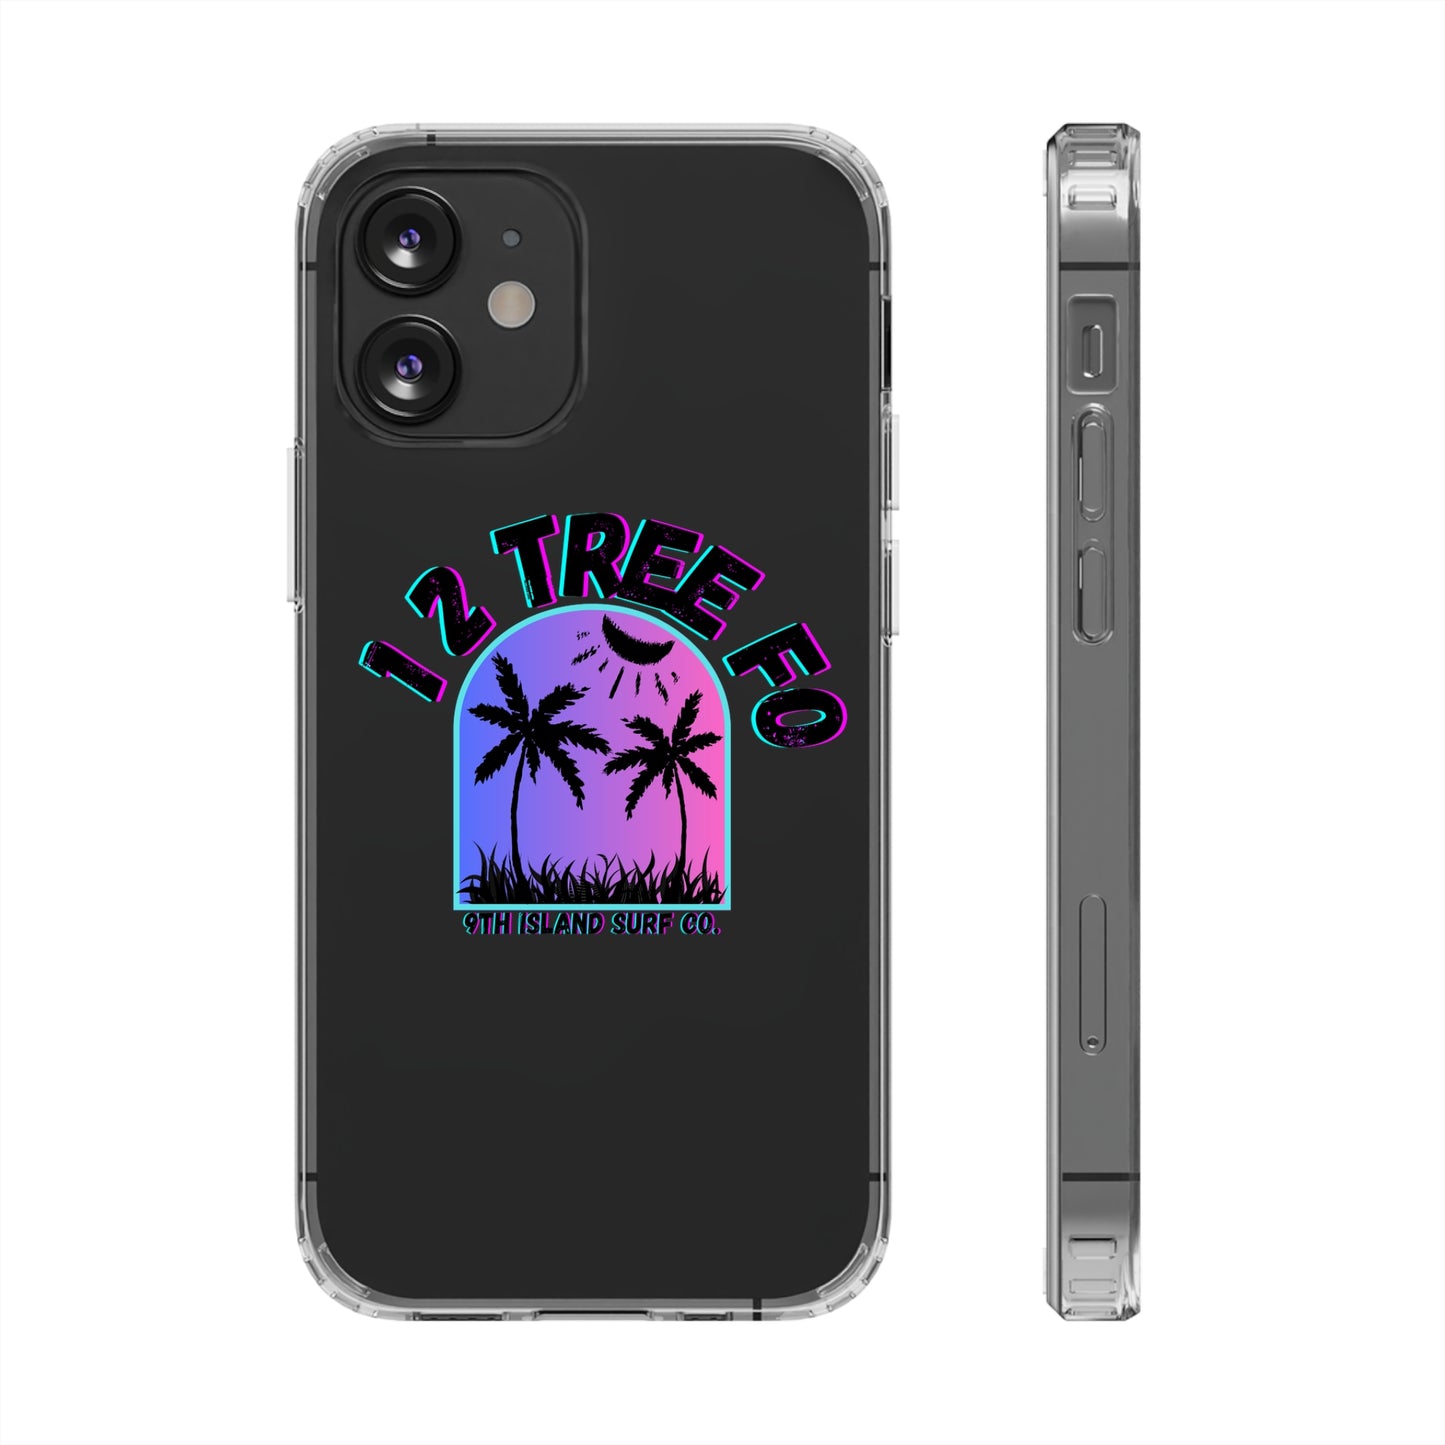 1 2 tree fo Clear Case